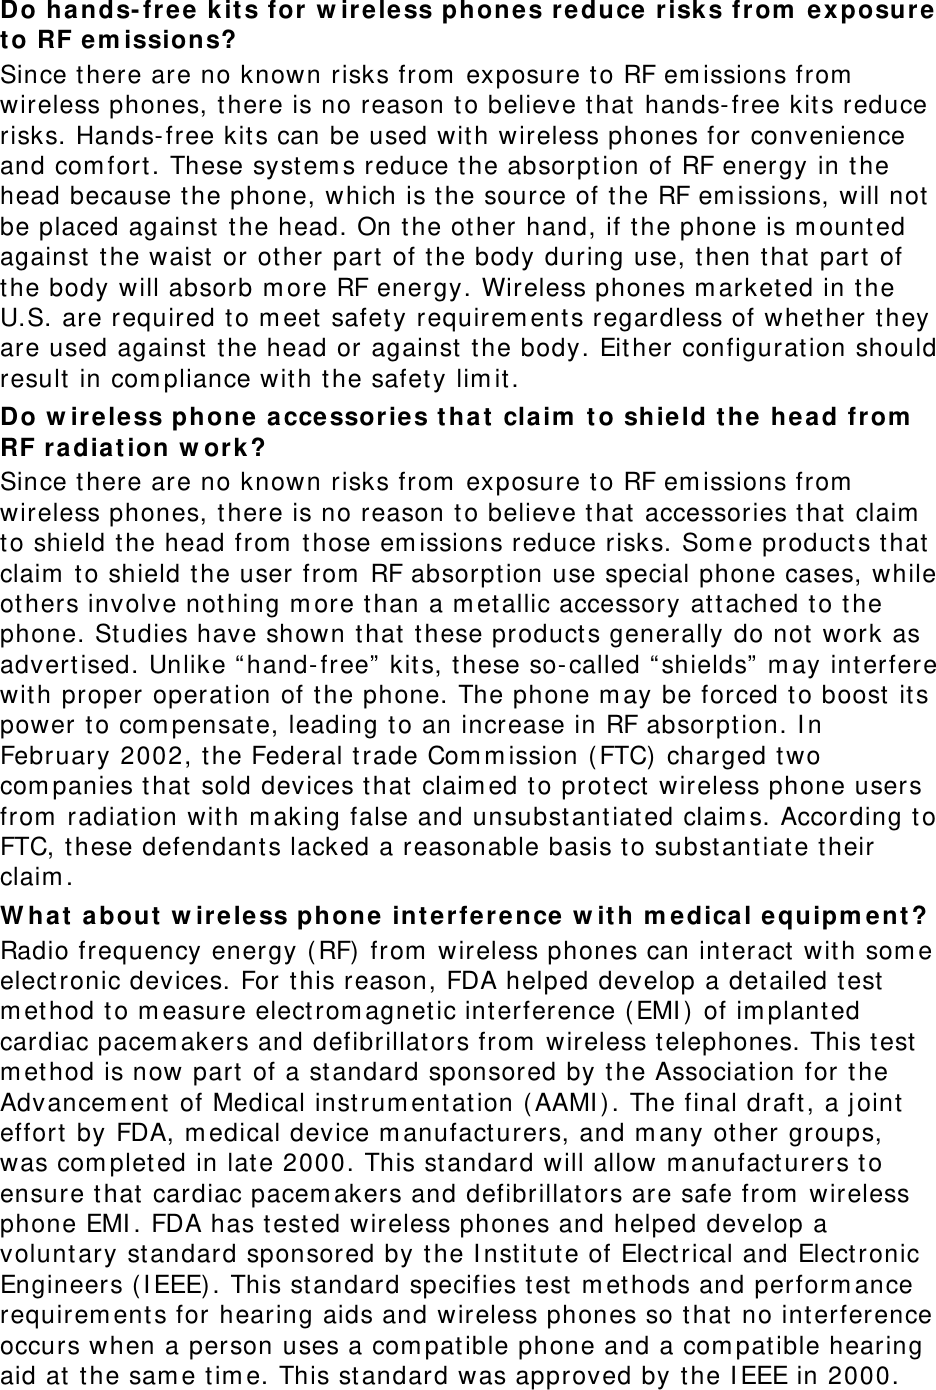 Do hands-free kits for wireless phones reduce risks from exposure to RF emissions? Since there are no known risks from exposure to RF emissions from wireless phones, there is no reason to believe that hands-free kits reduce risks. Hands-free kits can be used with wireless phones for convenience and comfort. These systems reduce the absorption of RF energy in the head because the phone, which is the source of the RF emissions, will not be placed against the head. On the other hand, if the phone is mounted against the waist or other part of the body during use, then that part of the body will absorb more RF energy. Wireless phones marketed in the U.S. are required to meet safety requirements regardless of whether they are used against the head or against the body. Either configuration should result in compliance with the safety limit. Do wireless phone accessories that claim to shield the head from RF radiation work? Since there are no known risks from exposure to RF emissions from wireless phones, there is no reason to believe that accessories that claim to shield the head from those emissions reduce risks. Some products that claim to shield the user from RF absorption use special phone cases, while others involve nothing more than a metallic accessory attached to the phone. Studies have shown that these products generally do not work as advertised. Unlike “hand-free” kits, these so-called “shields” may interfere with proper operation of the phone. The phone may be forced to boost its power to compensate, leading to an increase in RF absorption. In February 2002, the Federal trade Commission (FTC) charged two companies that sold devices that claimed to protect wireless phone users from radiation with making false and unsubstantiated claims. According to FTC, these defendants lacked a reasonable basis to substantiate their claim. What about wireless phone interference with medical equipment? Radio frequency energy (RF) from wireless phones can interact with some electronic devices. For this reason, FDA helped develop a detailed test method to measure electromagnetic interference (EMI) of implanted cardiac pacemakers and defibrillators from wireless telephones. This test method is now part of a standard sponsored by the Association for the Advancement of Medical instrumentation (AAMI). The final draft, a joint effort by FDA, medical device manufacturers, and many other groups, was completed in late 2000. This standard will allow manufacturers to ensure that cardiac pacemakers and defibrillators are safe from wireless phone EMI. FDA has tested wireless phones and helped develop a voluntary standard sponsored by the Institute of Electrical and Electronic Engineers (IEEE). This standard specifies test methods and performance requirements for hearing aids and wireless phones so that no interference occurs when a person uses a compatible phone and a compatible hearing aid at the same time. This standard was approved by the IEEE in 2000. 